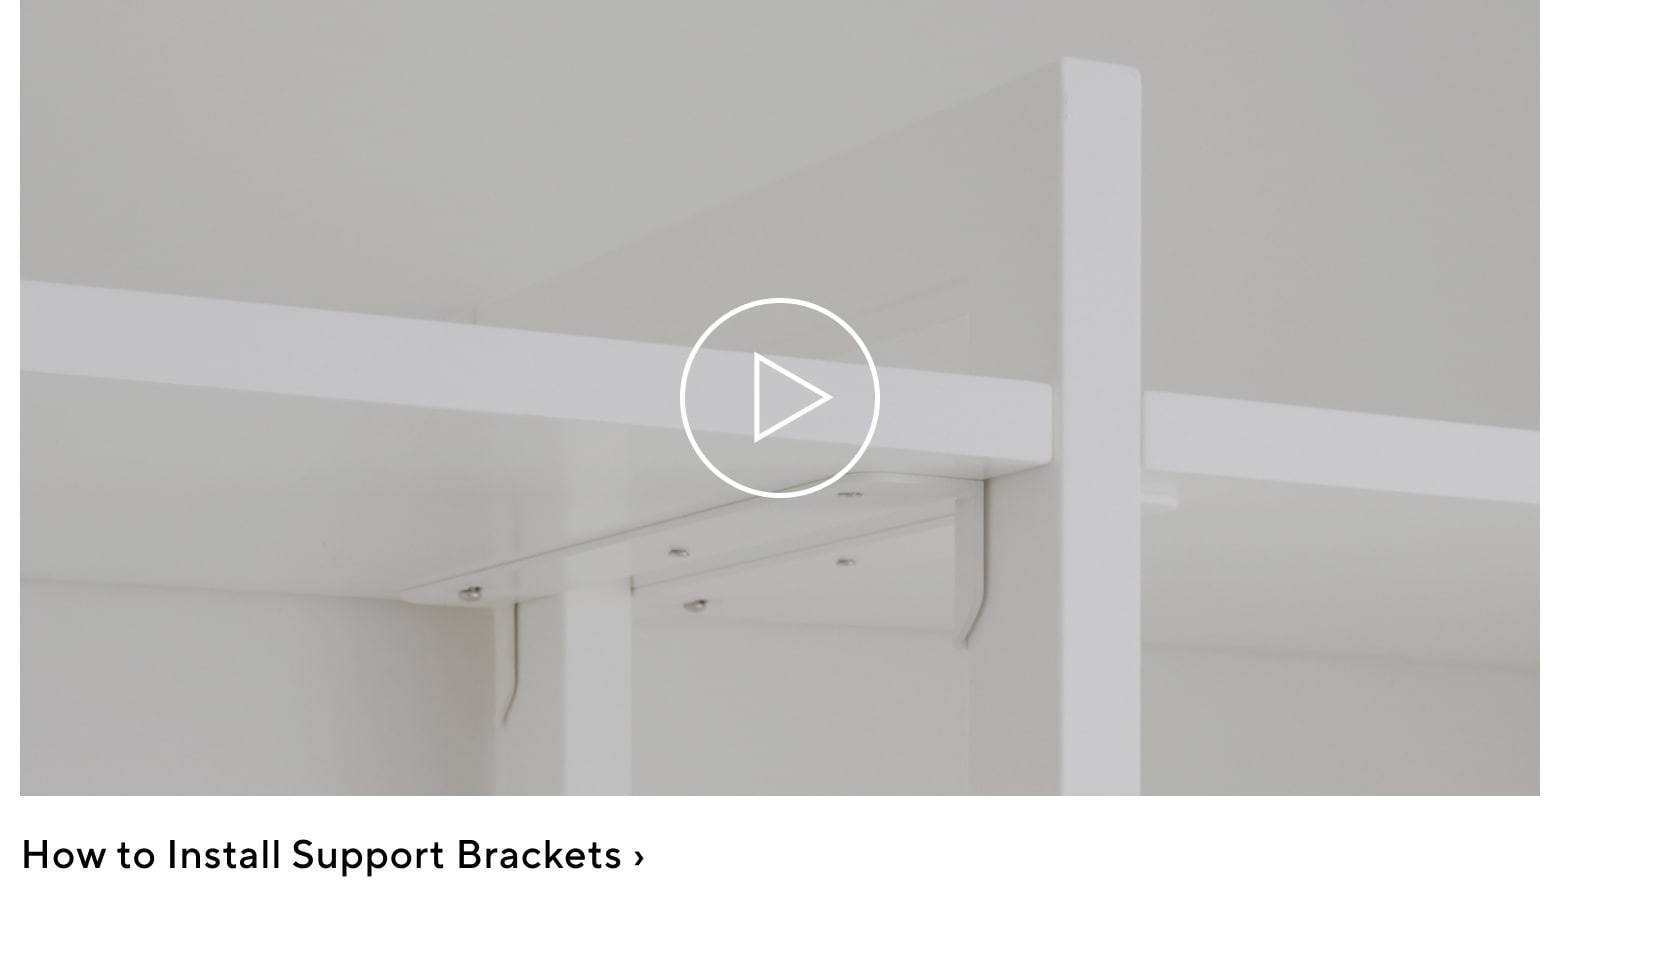 How to Install a Support Brackets